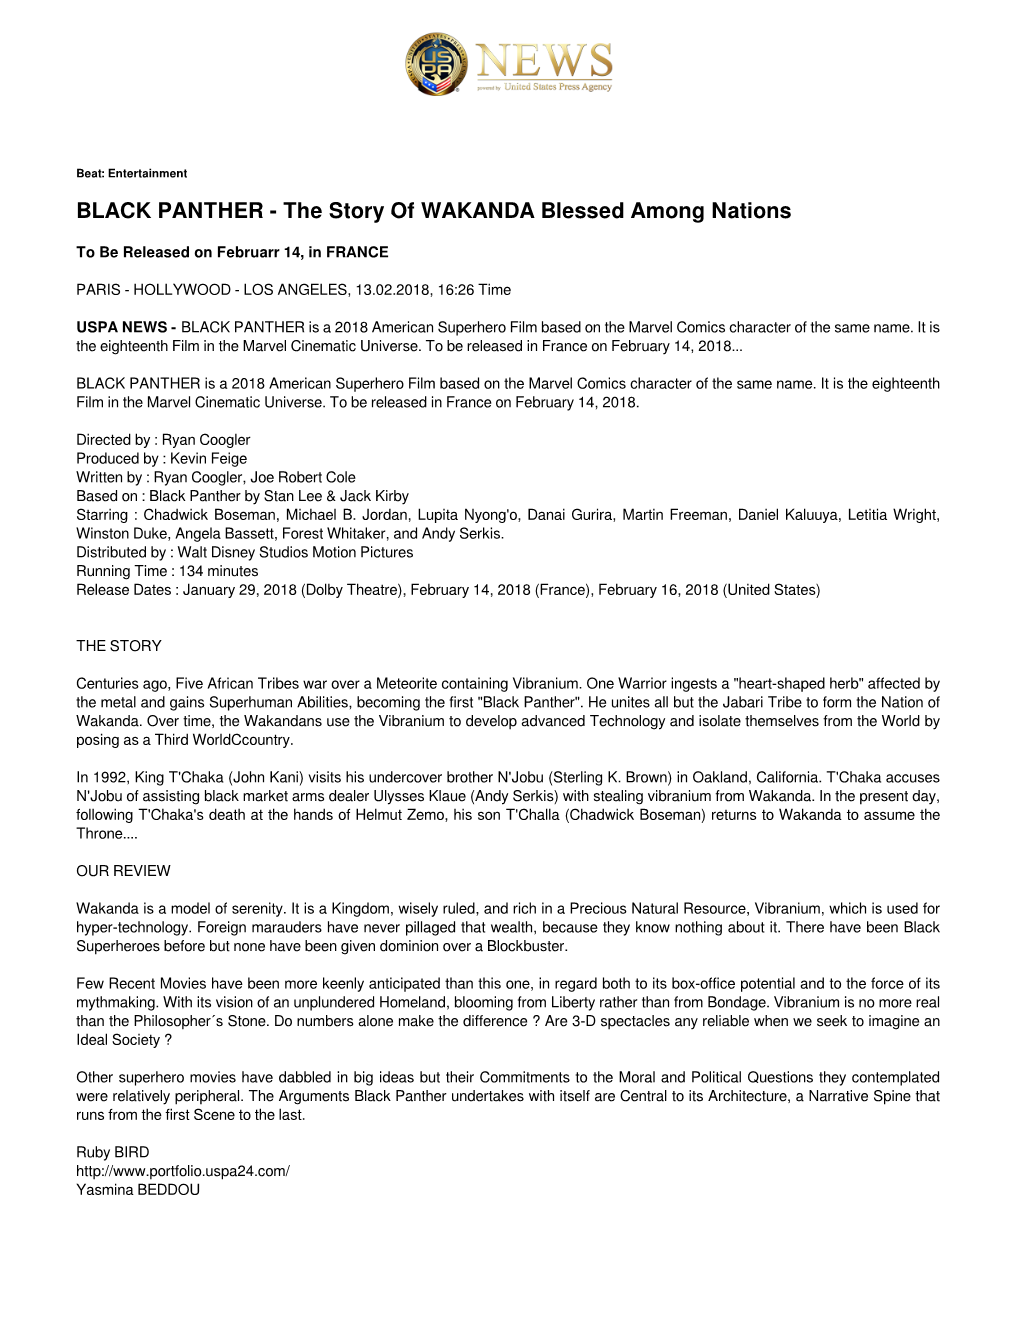 BLACK PANTHER - the Story of WAKANDA Blessed Among Nations